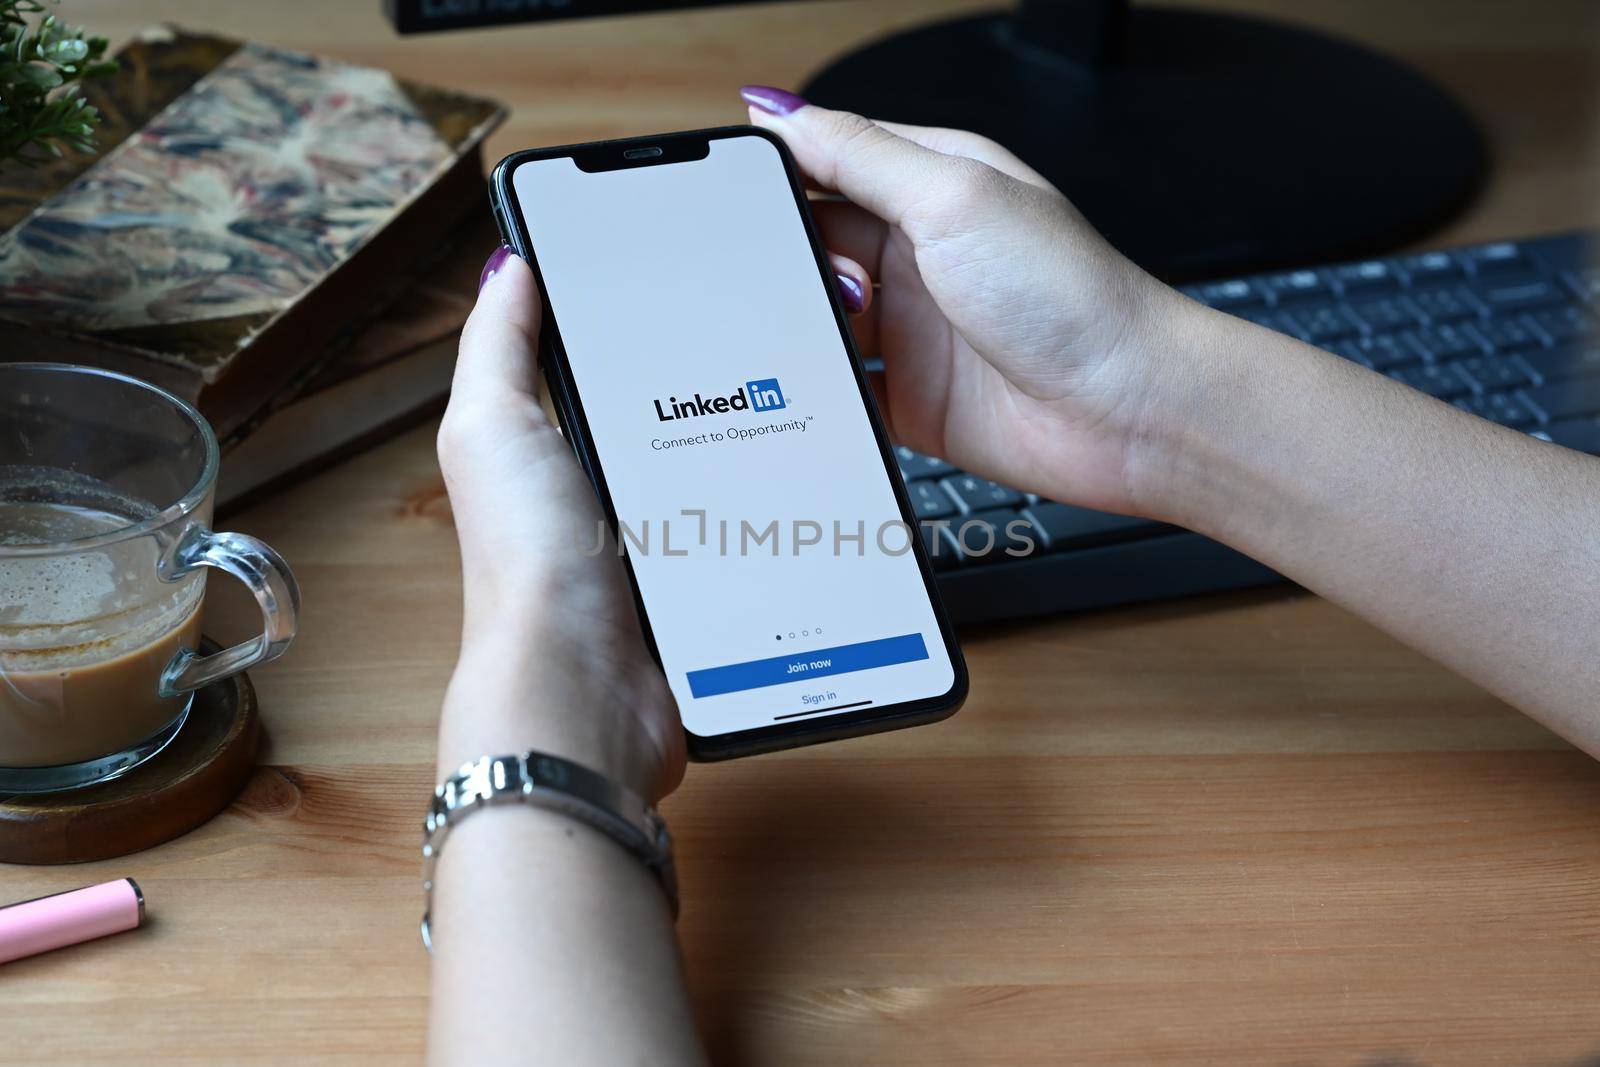 Chiang Mai, Thailand - Mar 01,2022: Woman holding smart phone with LinkedIn app. LinkedIn is a social network for the business community.